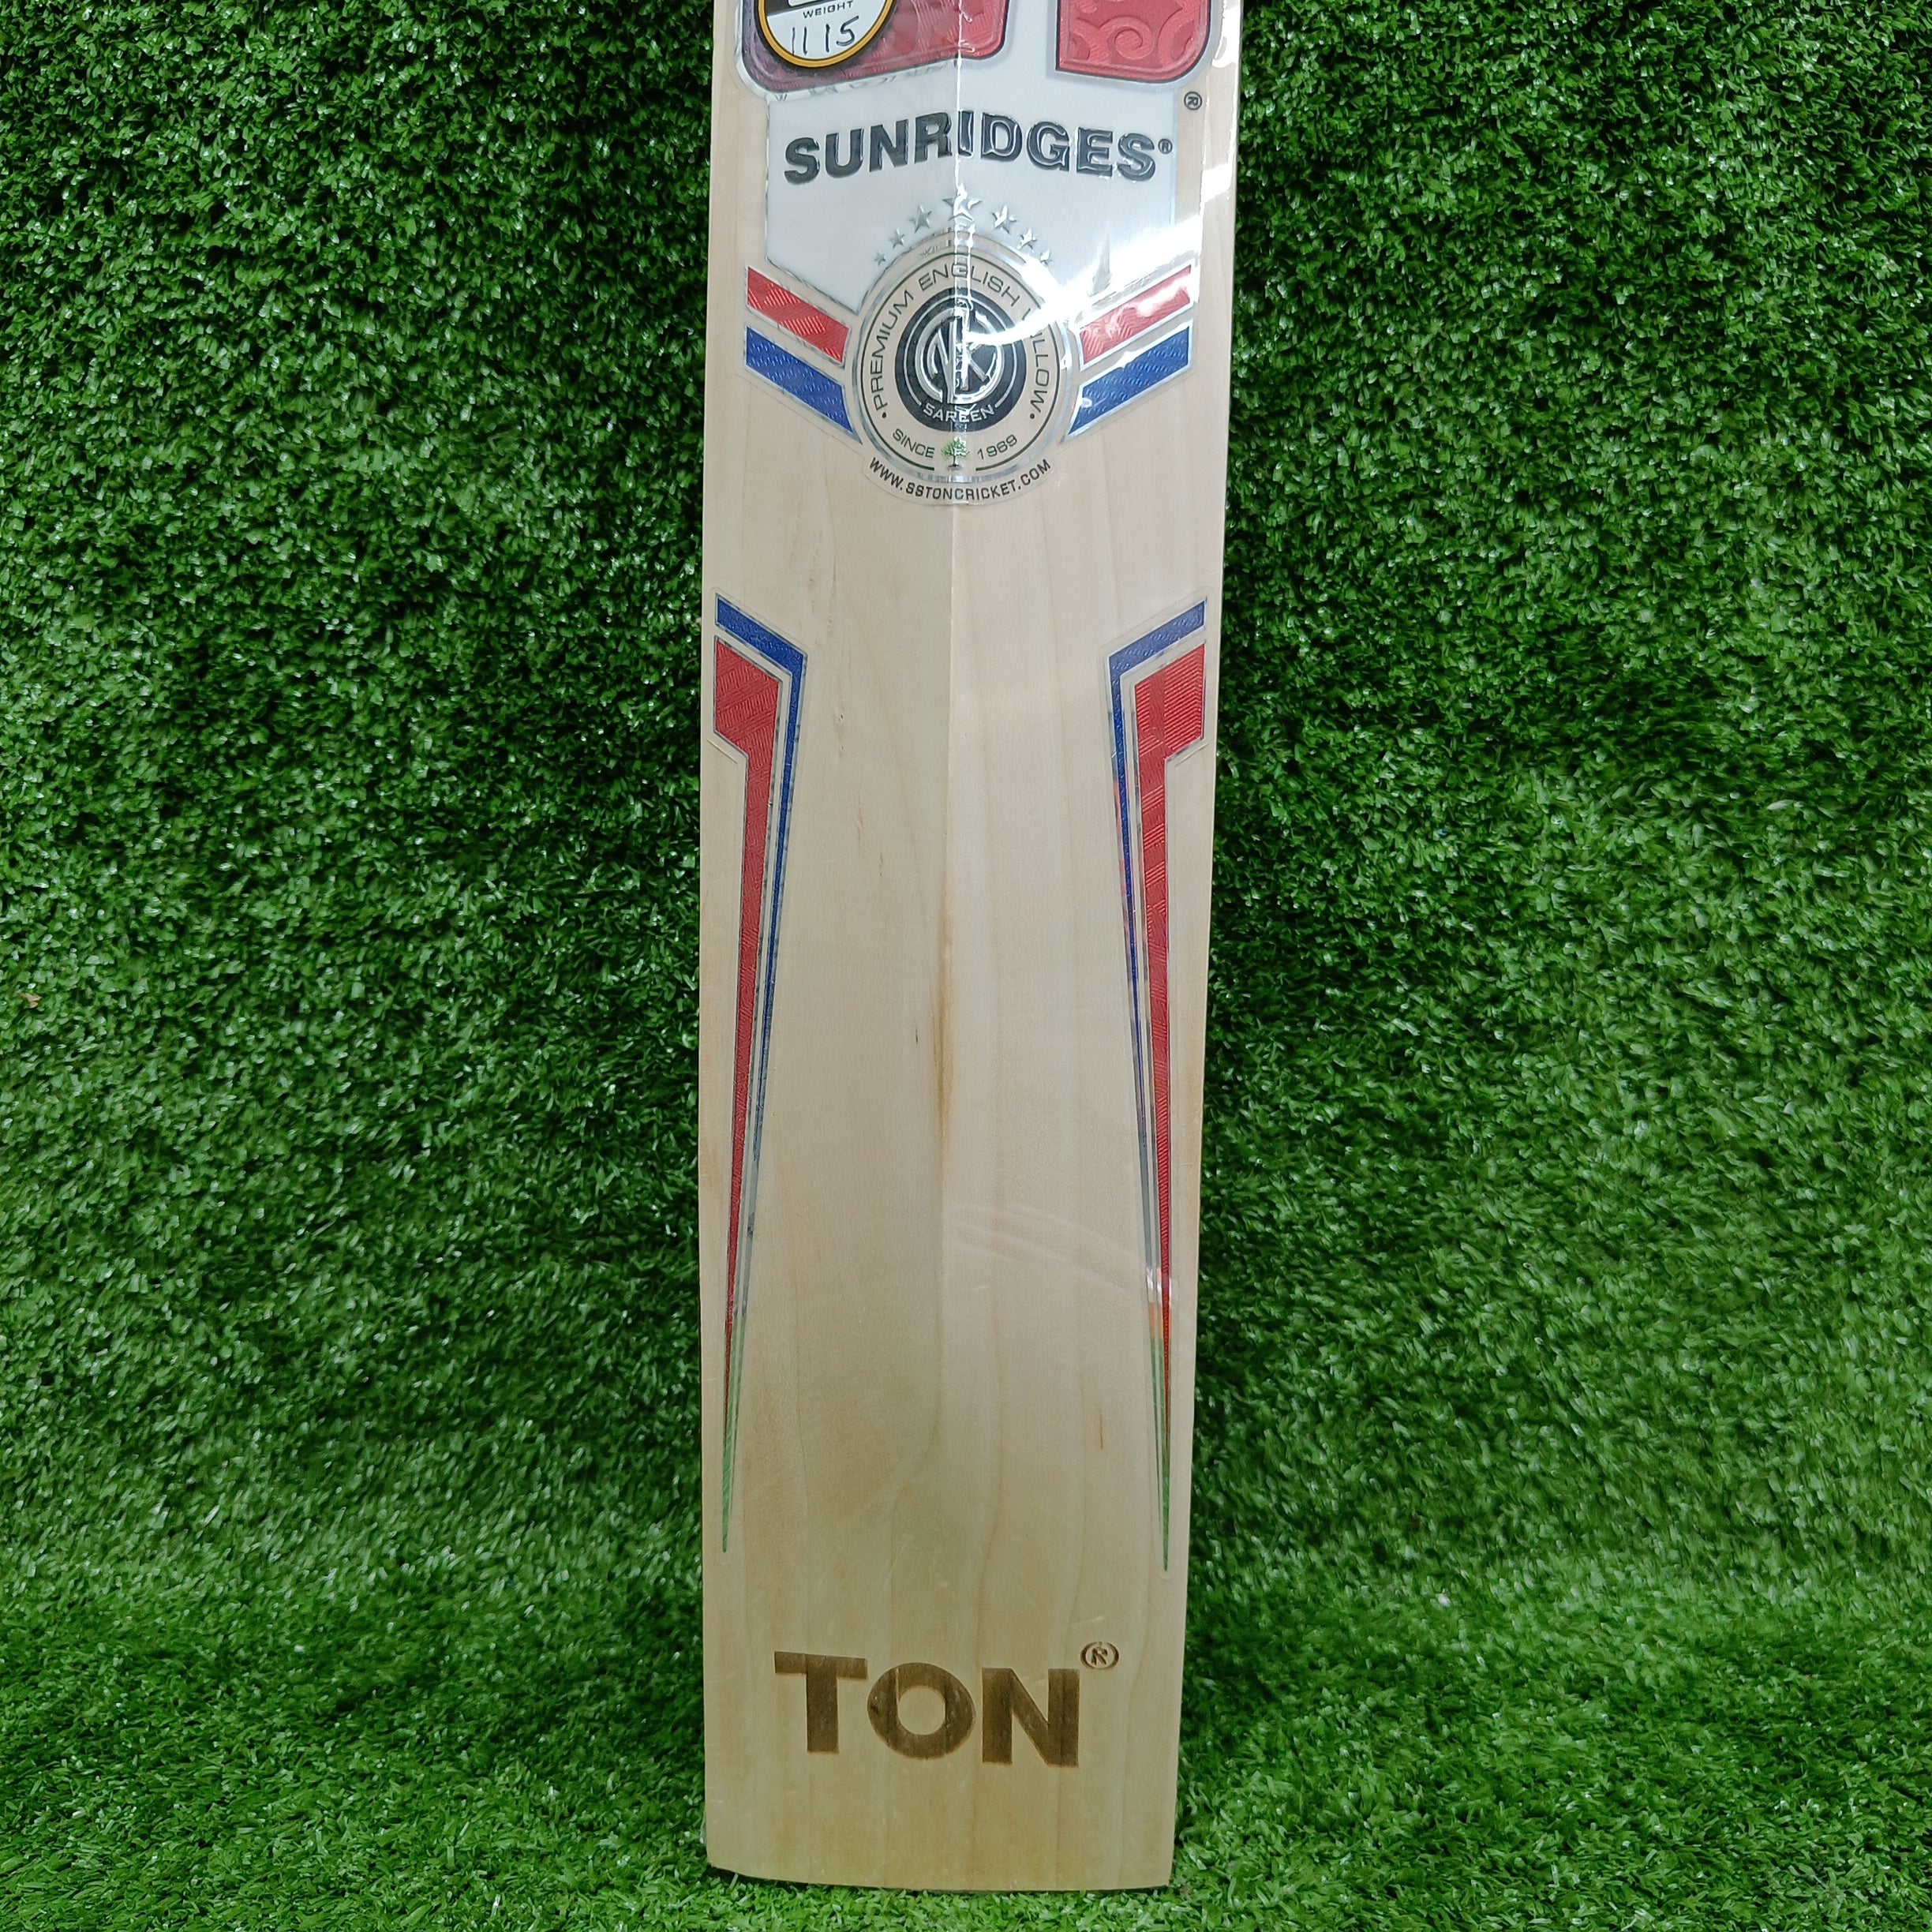 SS World Cup Red Edition English Willow Cricket Bat